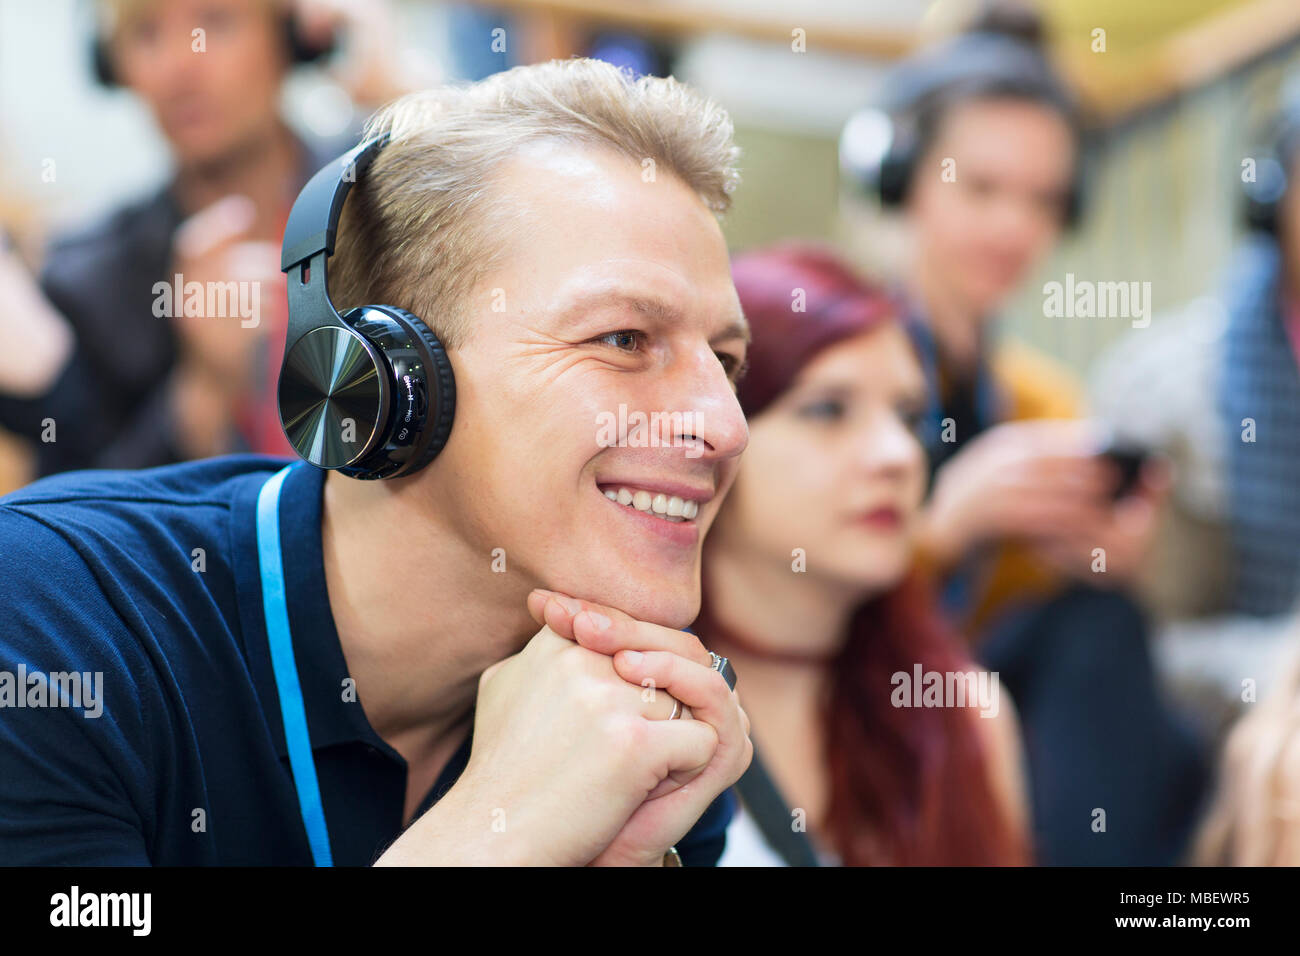 Smiling businessman with headphones listening in conference audience Stock Photo